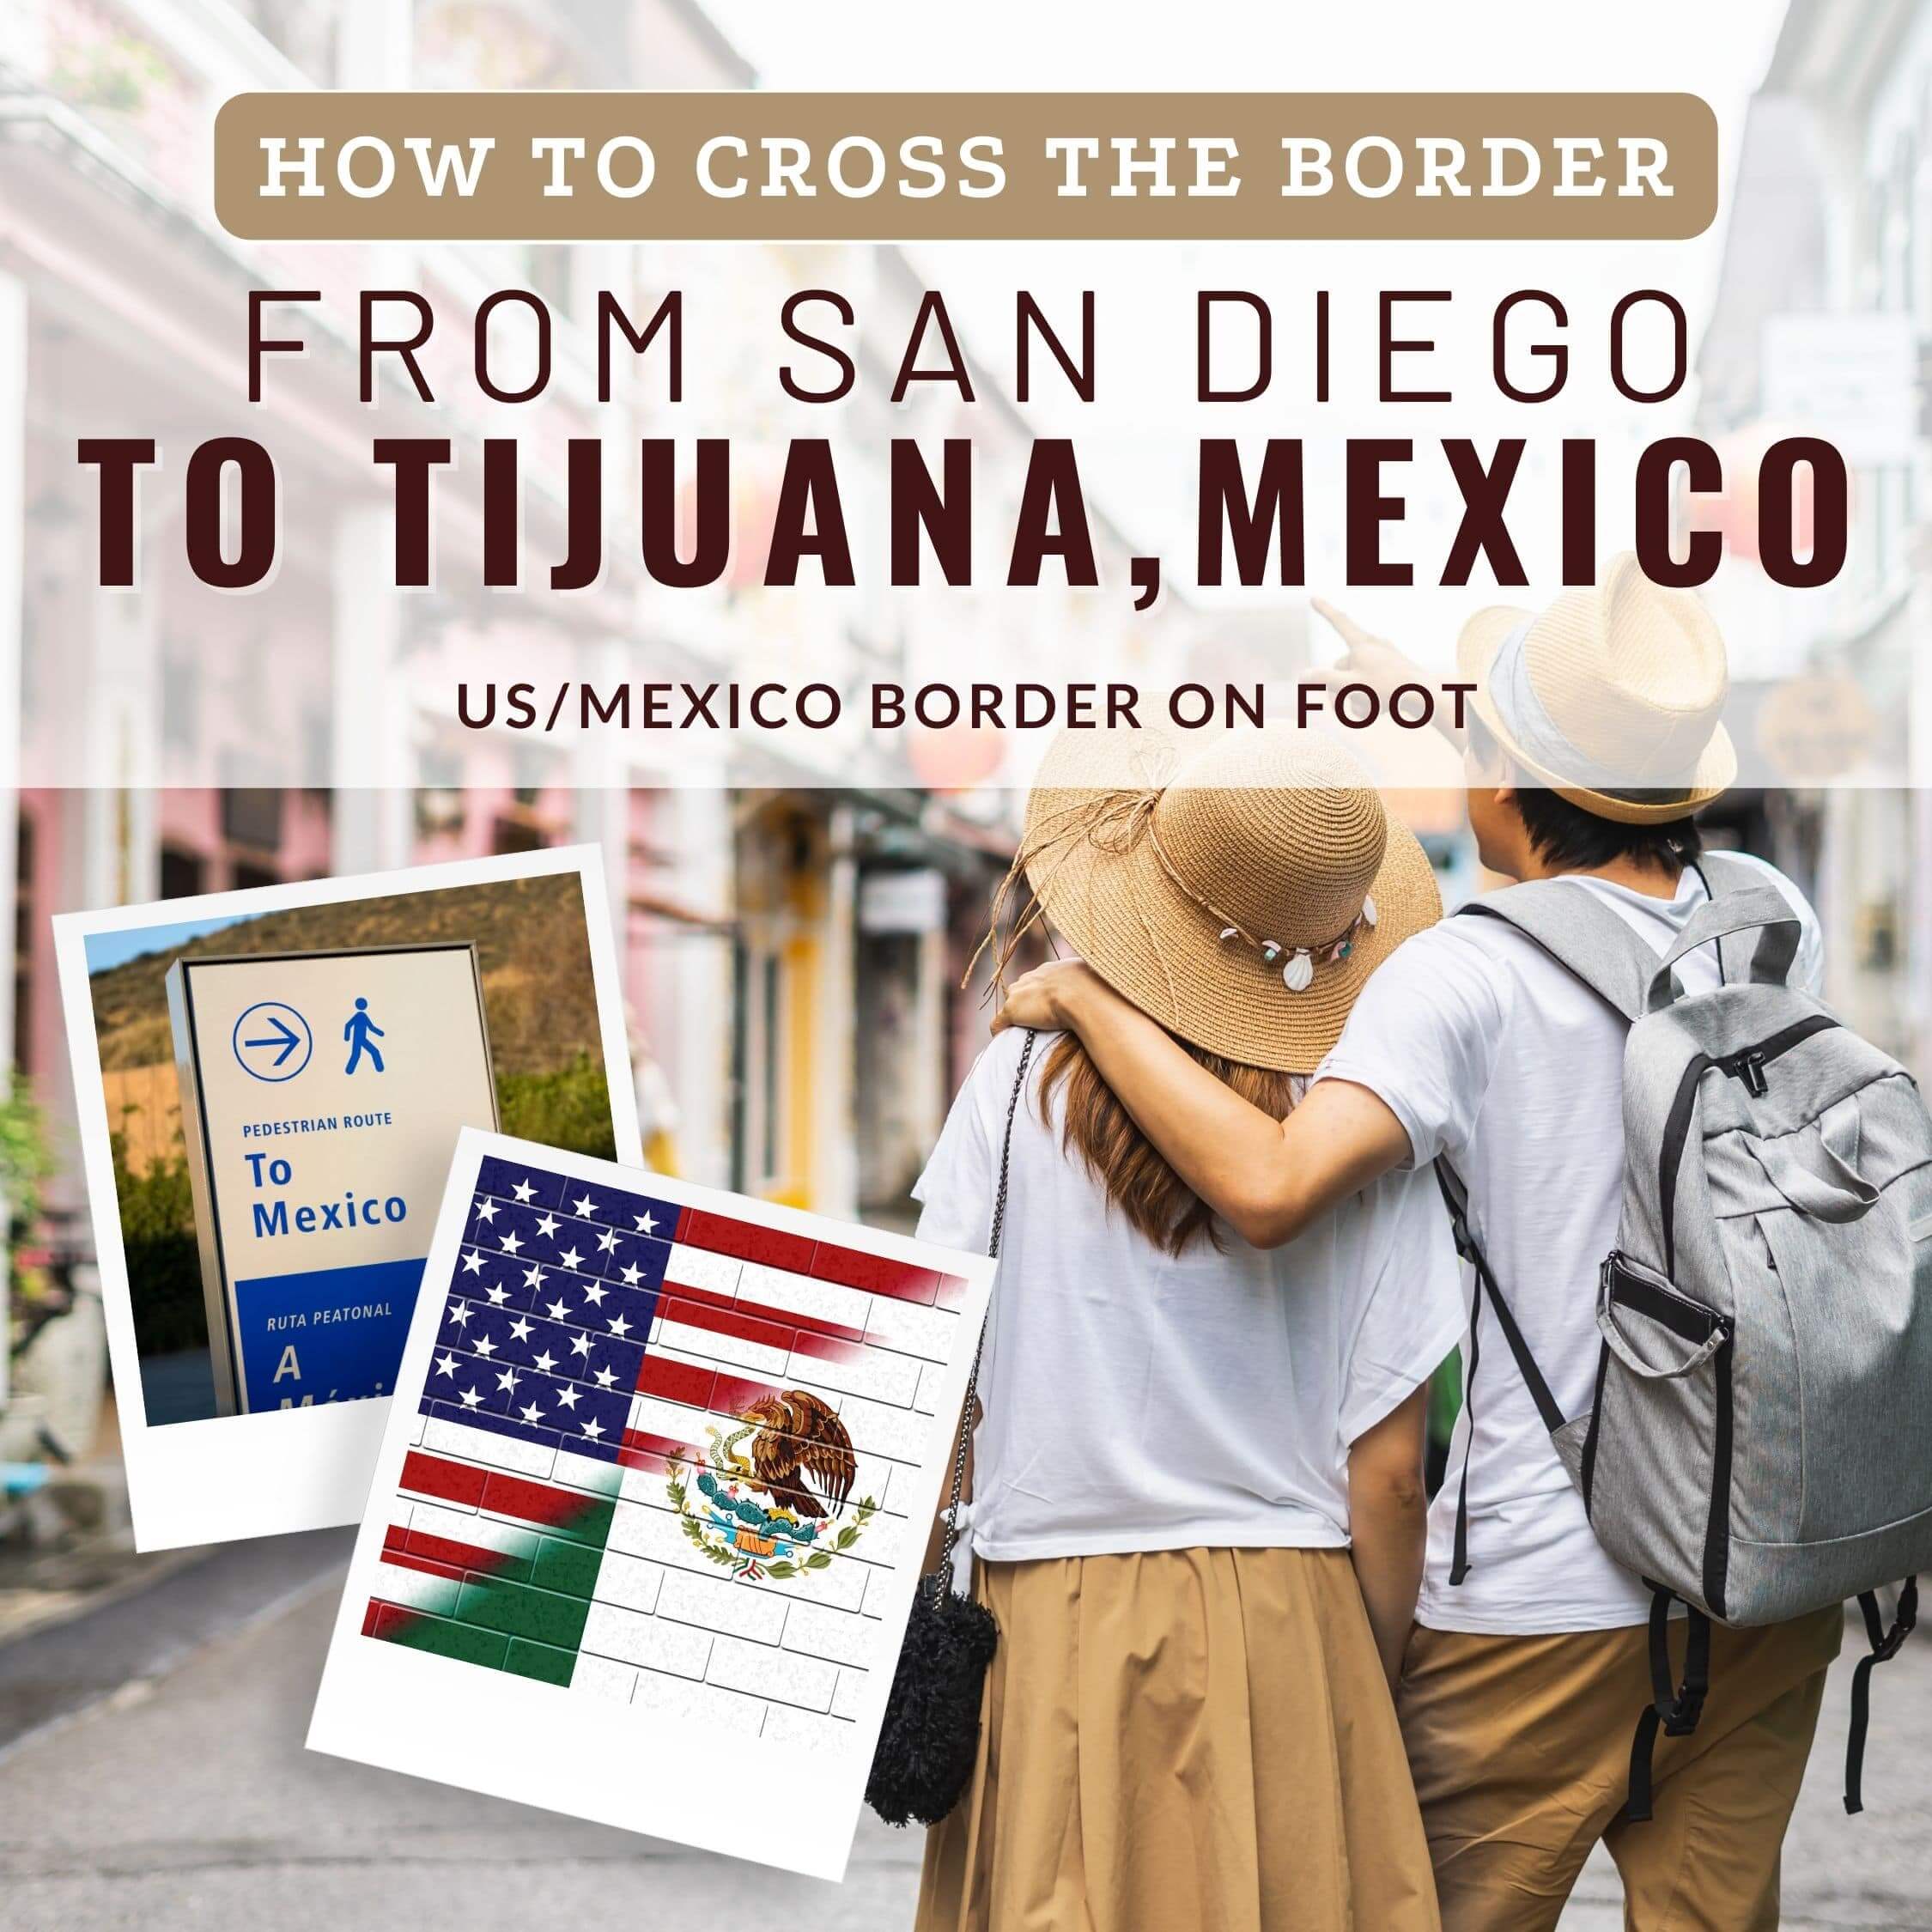 How to Cross the Border From San Diego to Tijuana, Mexico